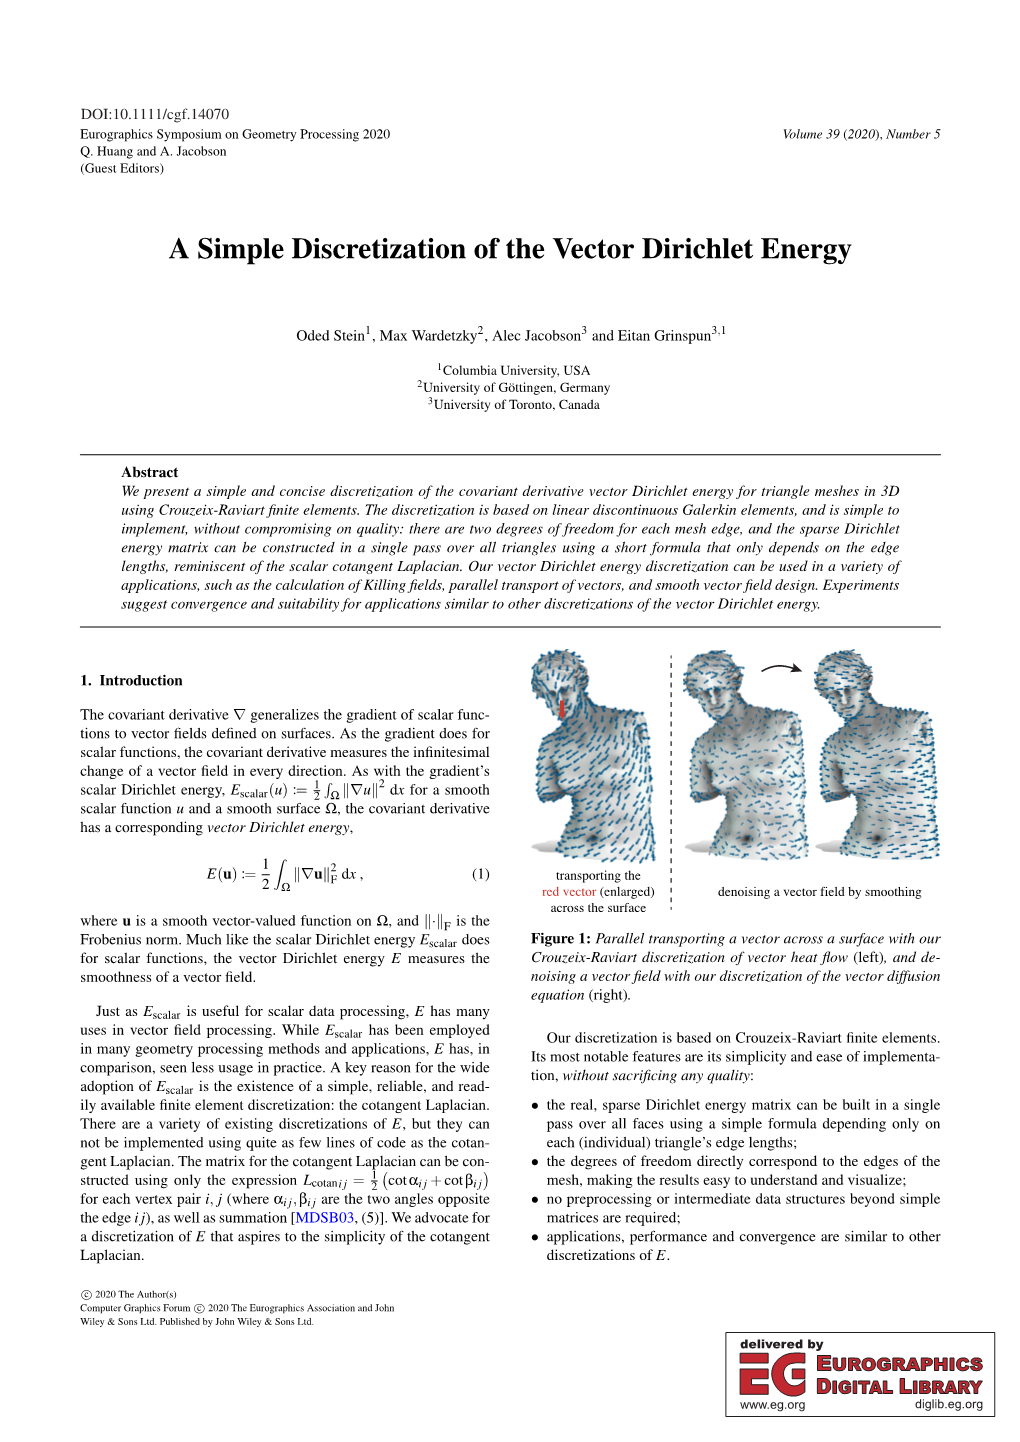 A Simple Discretization of the Vector Dirichlet Energy